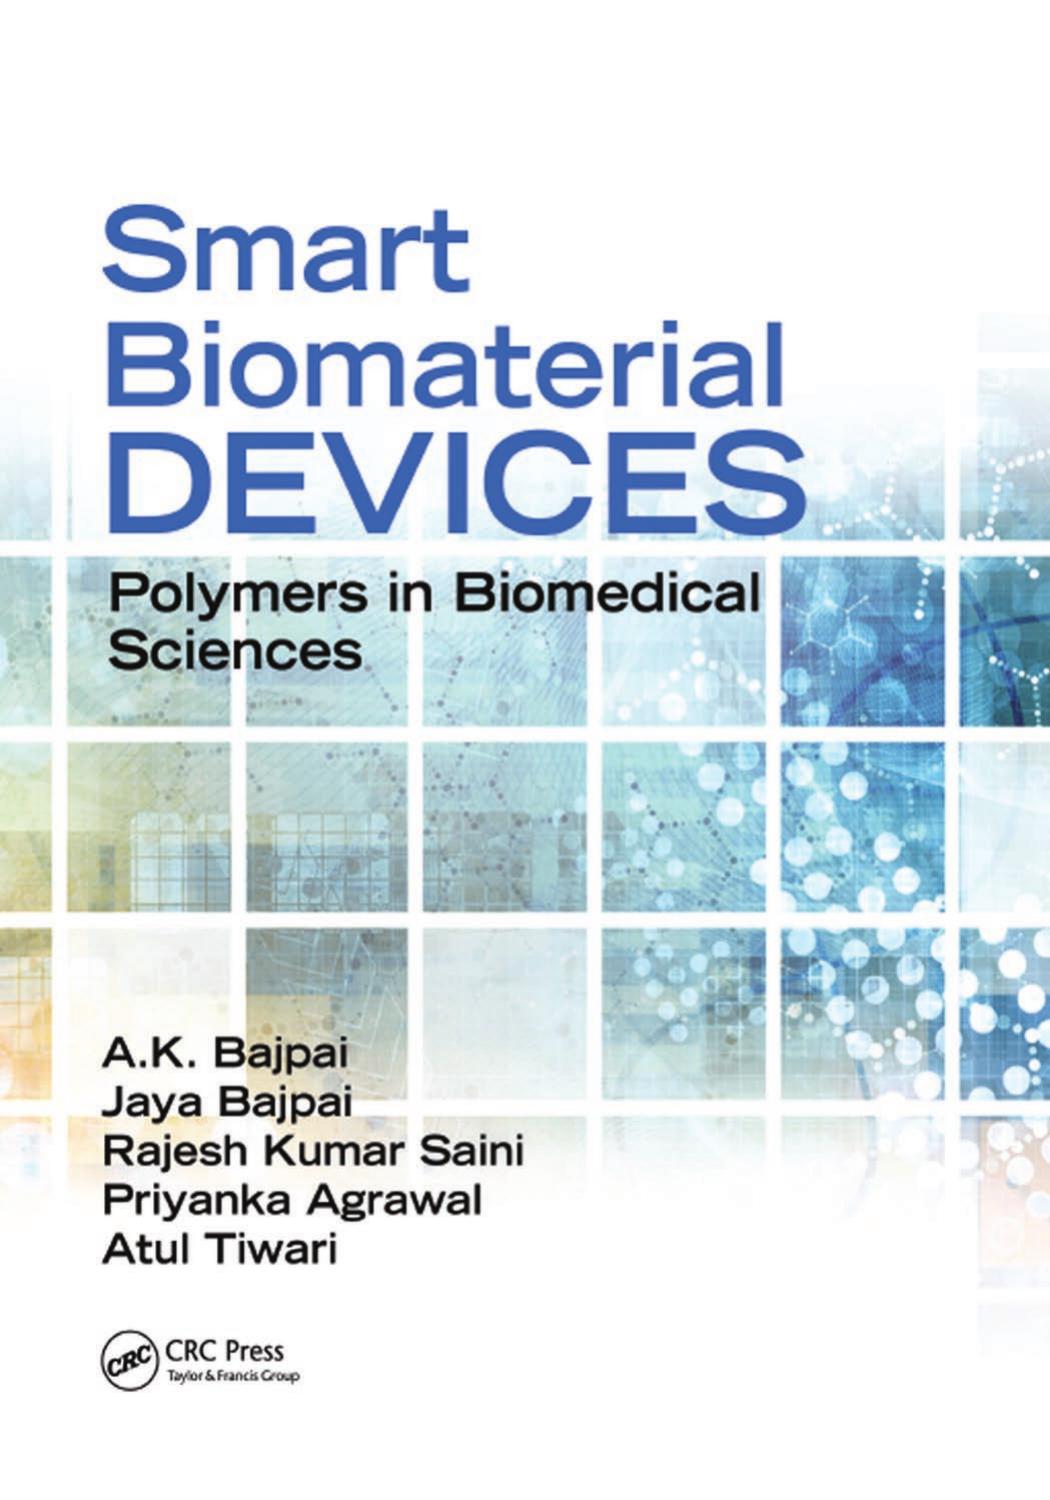 Smart biomaterial devices polymers in biomedical sciences 2017